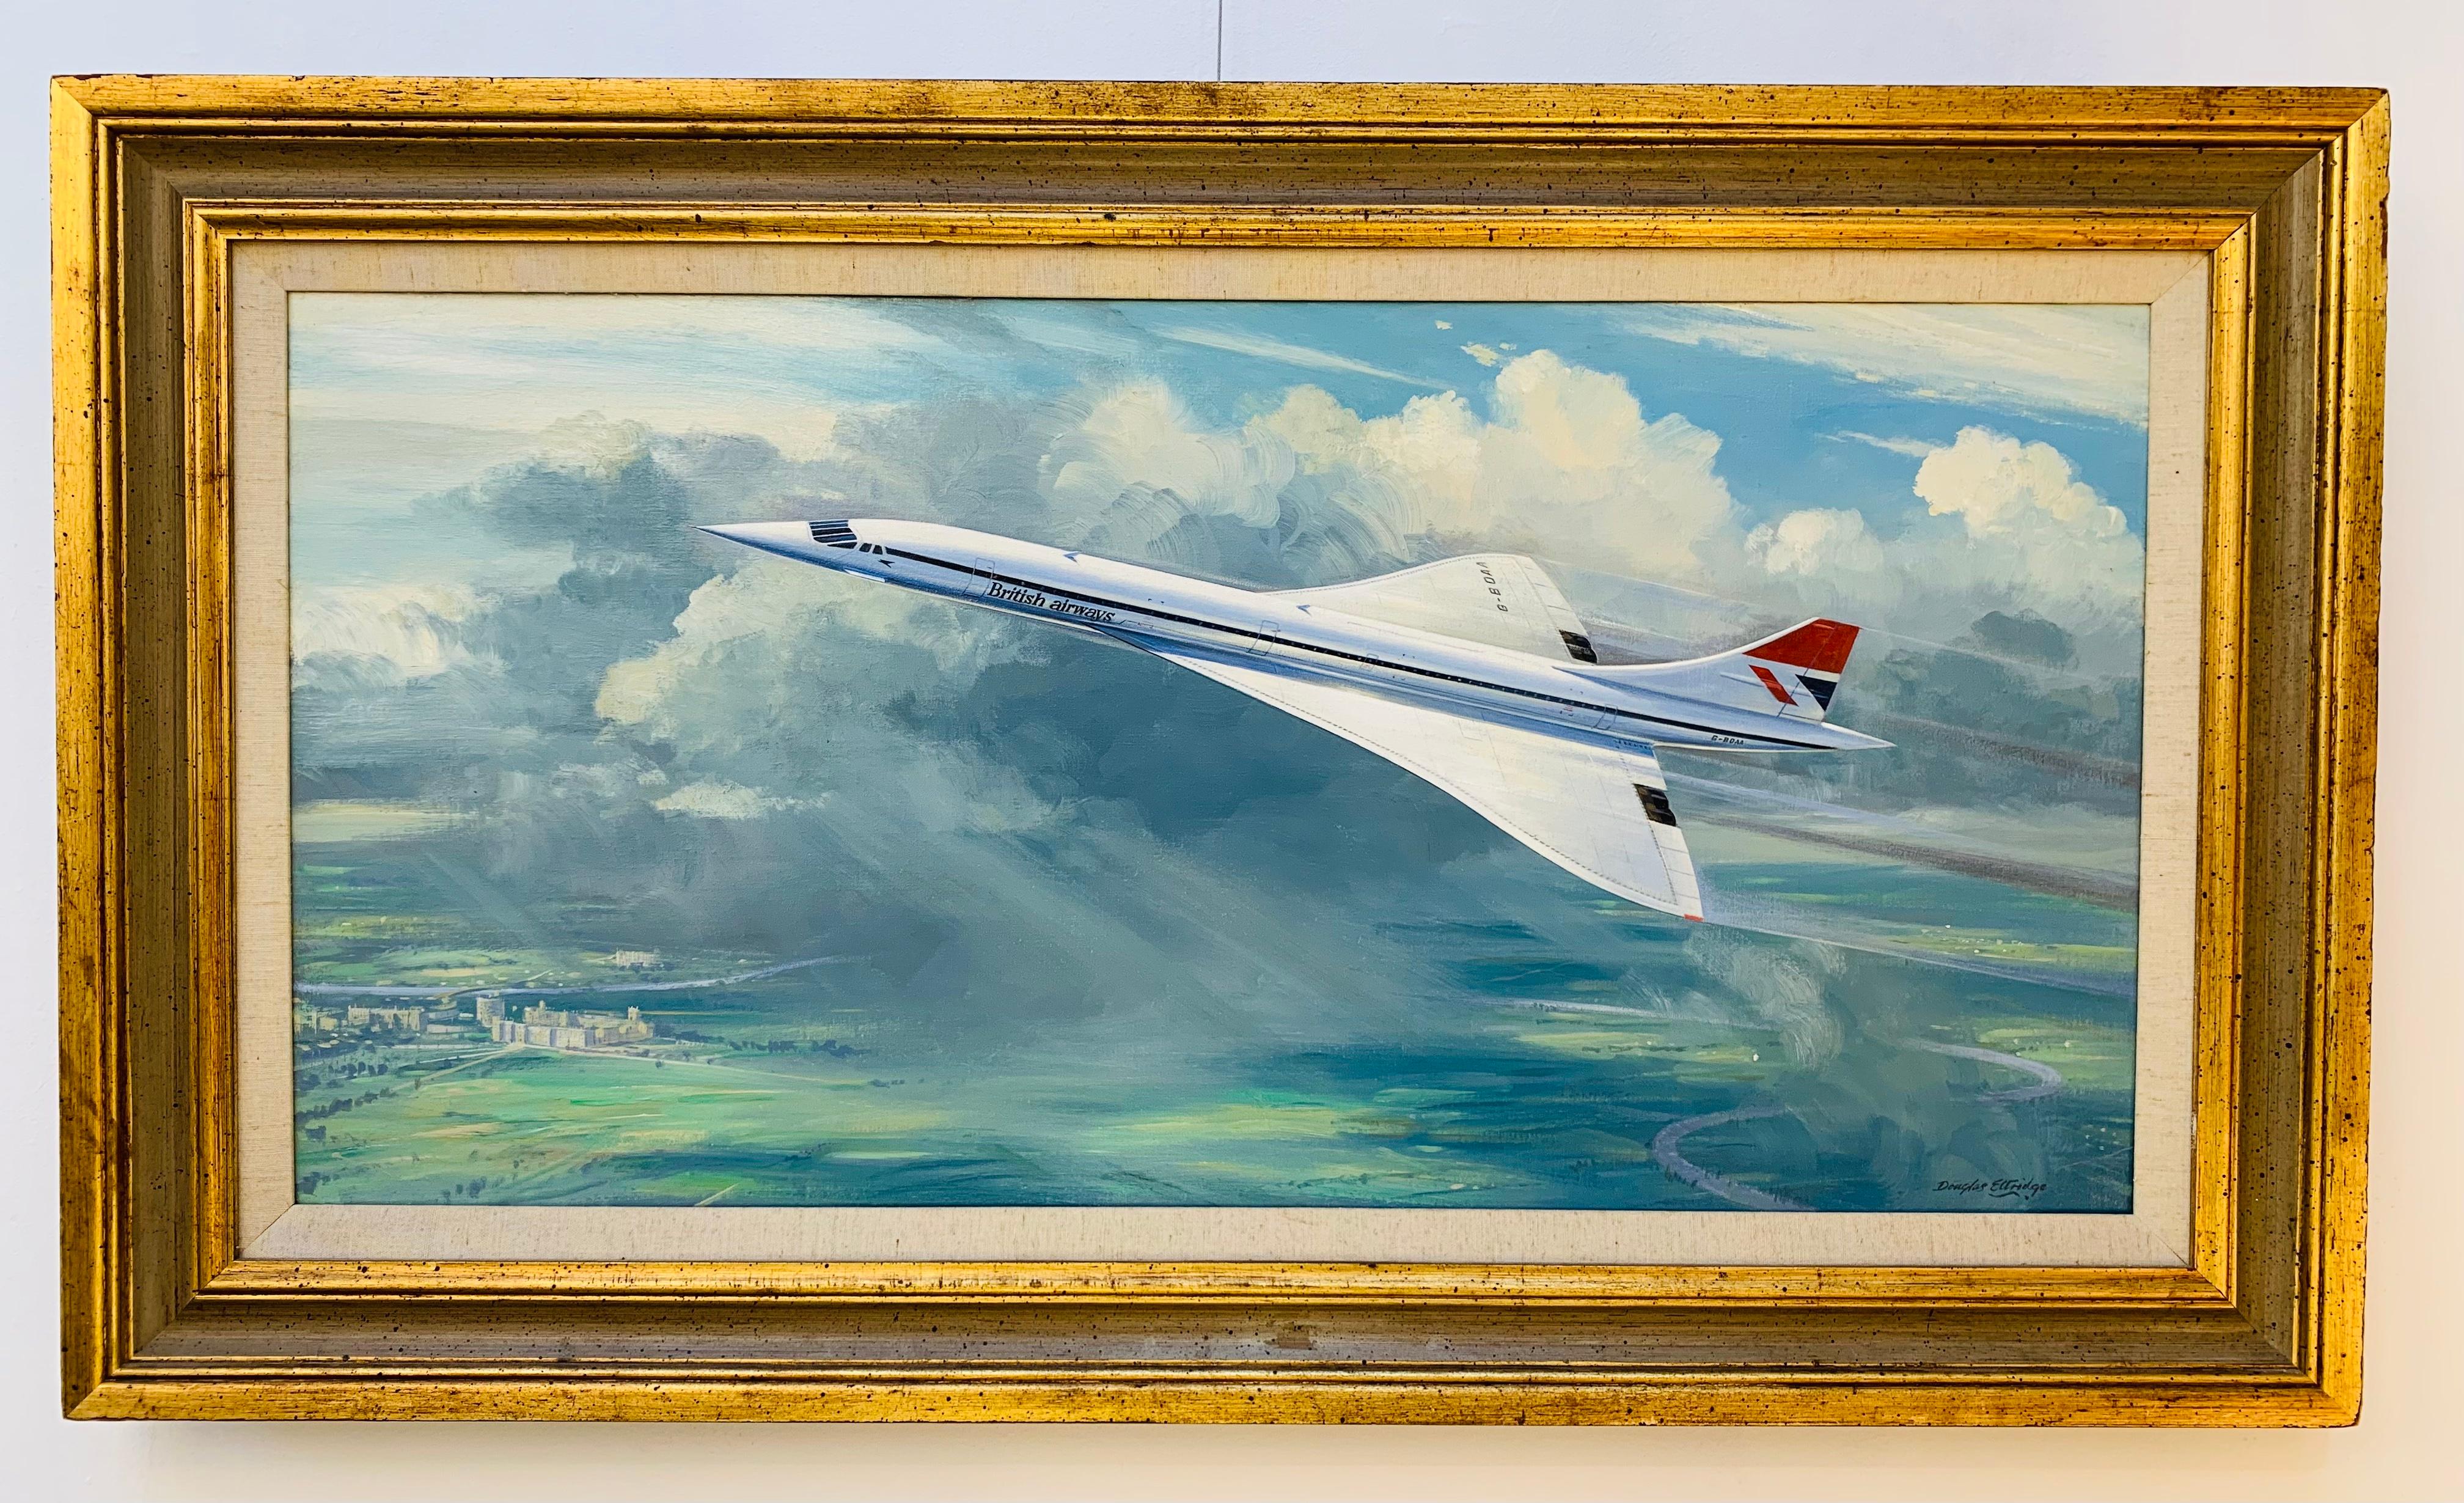 Reknowned English aviation artist, Douglas Ettridge, (1929- 2009) is probably better known in the United States where his work is held in many prestigious museums and private collections. Concorde, was one of his favourite aircrafts, he flew on its